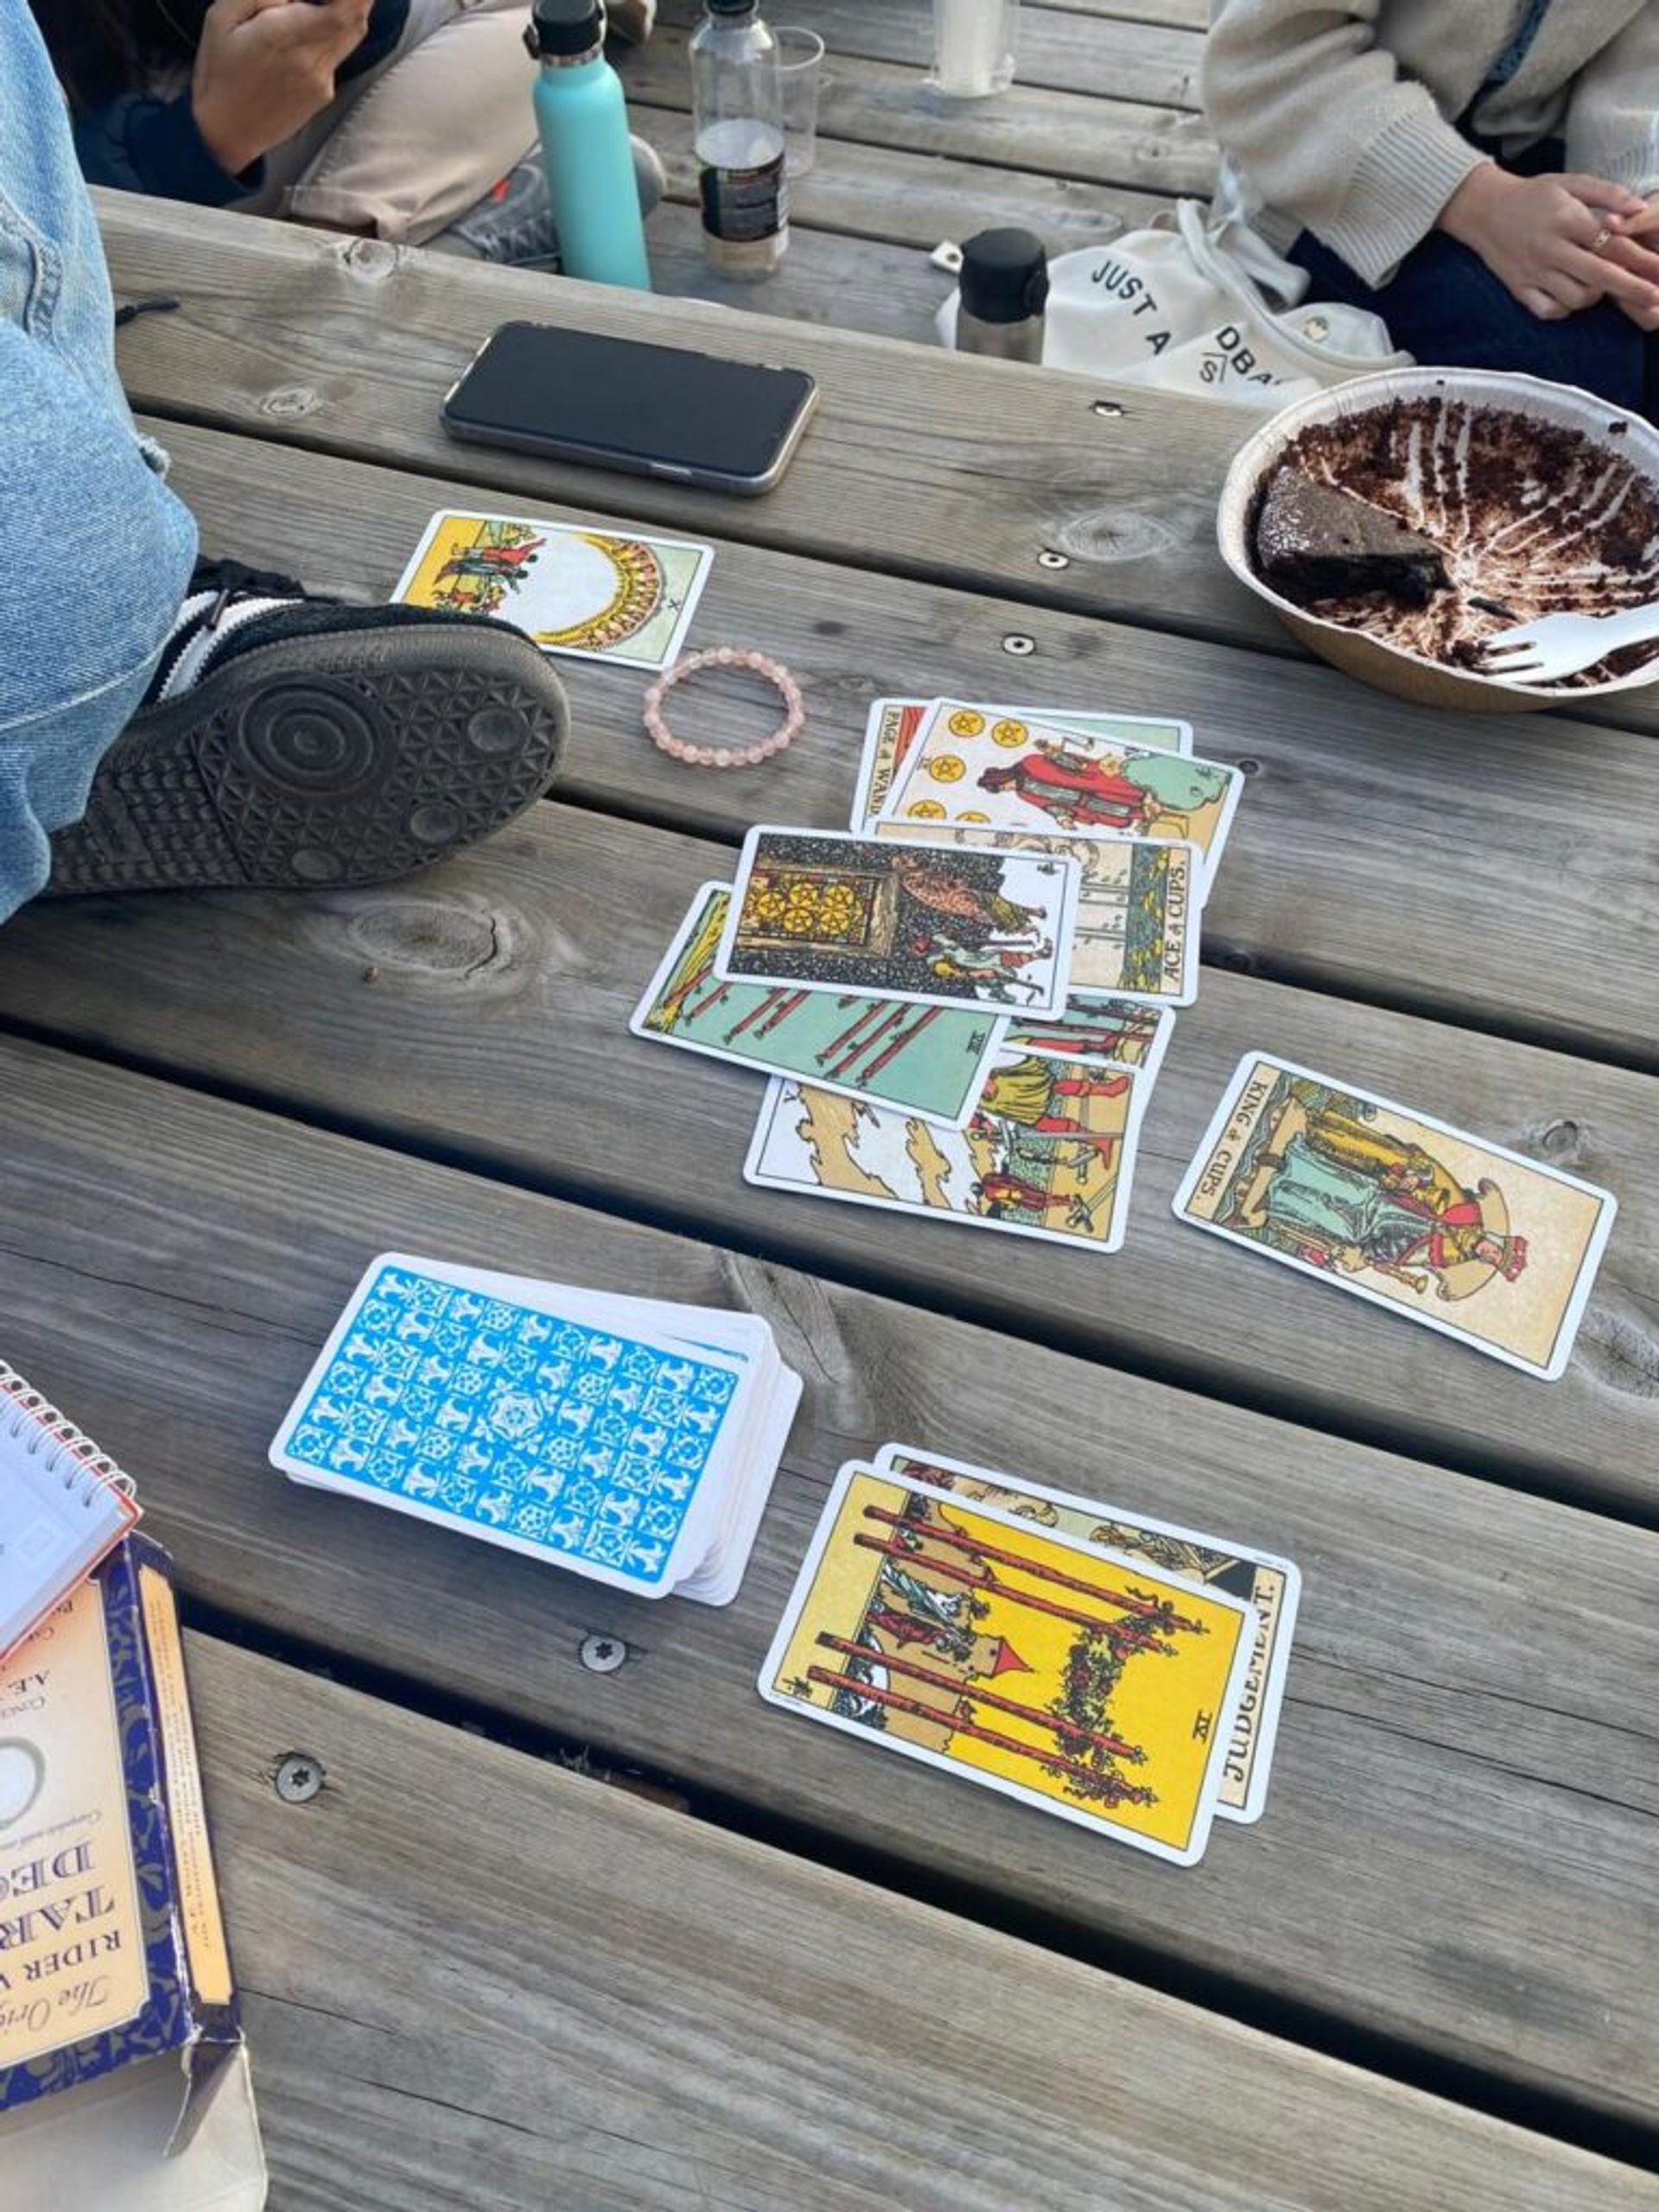 International students doing a tarot card reading with friends.